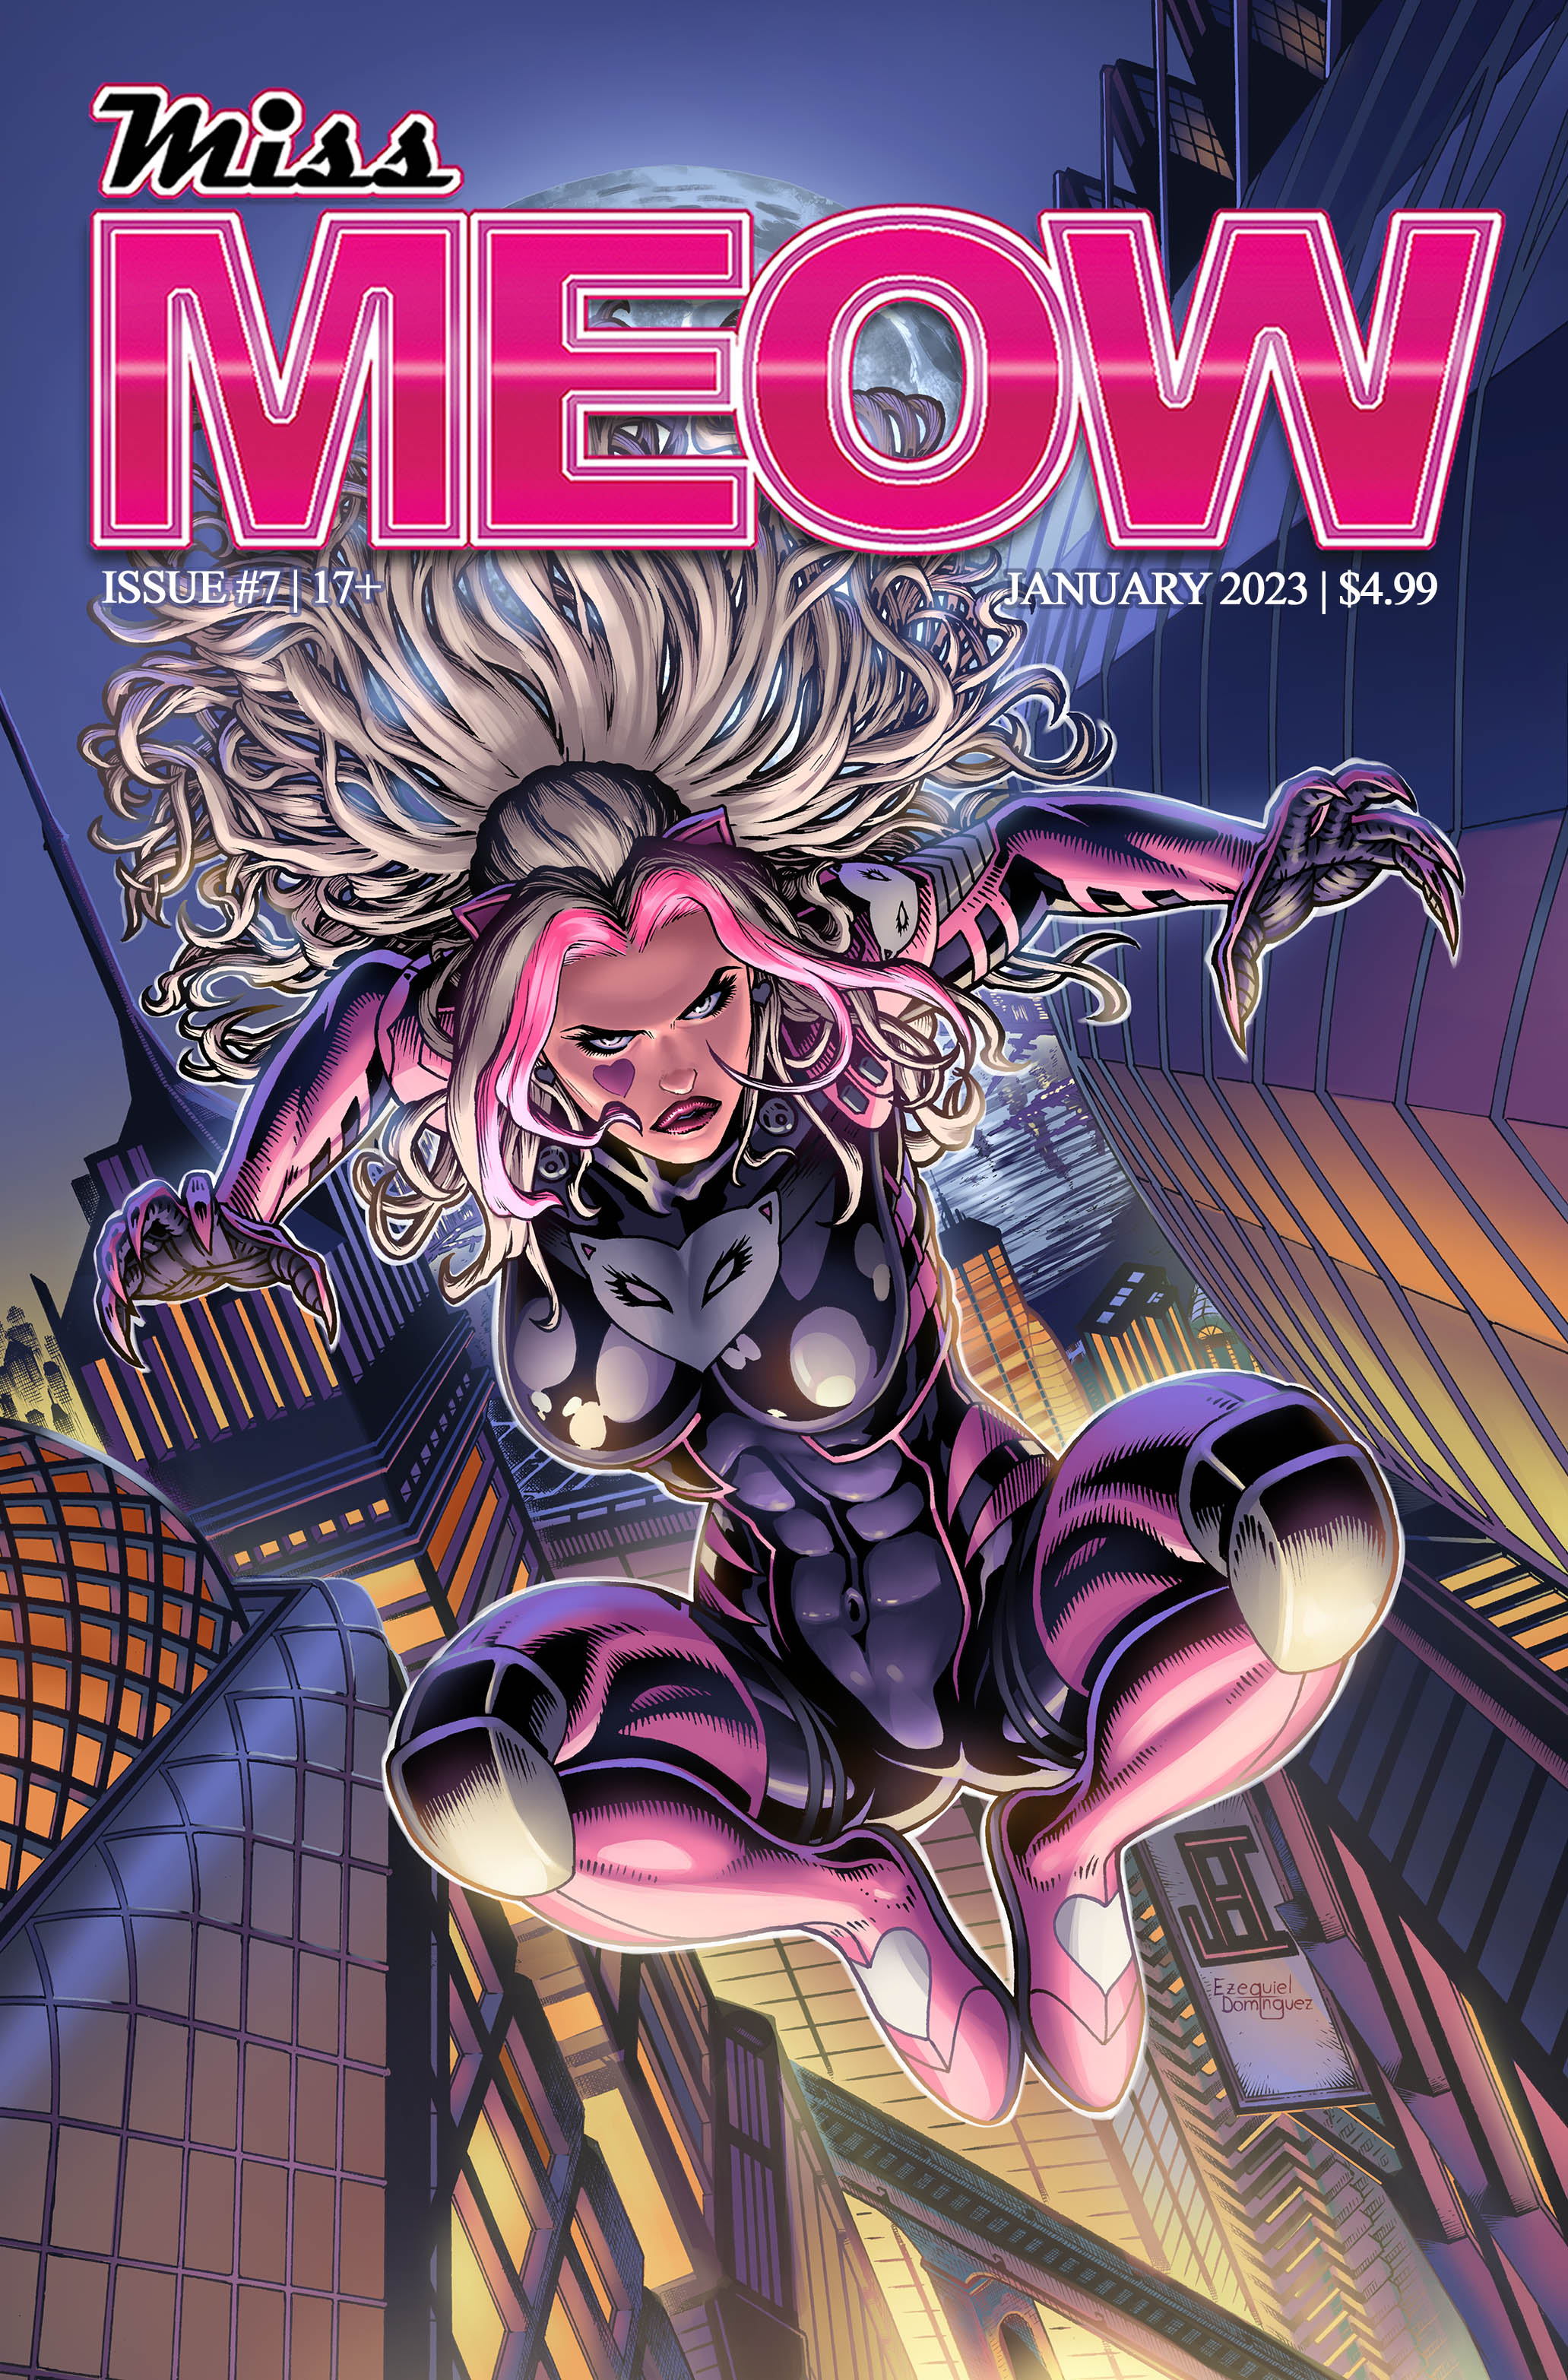 Miss Meow #7 Cover A Jeffrey Edwards (Mature) (Of 8)